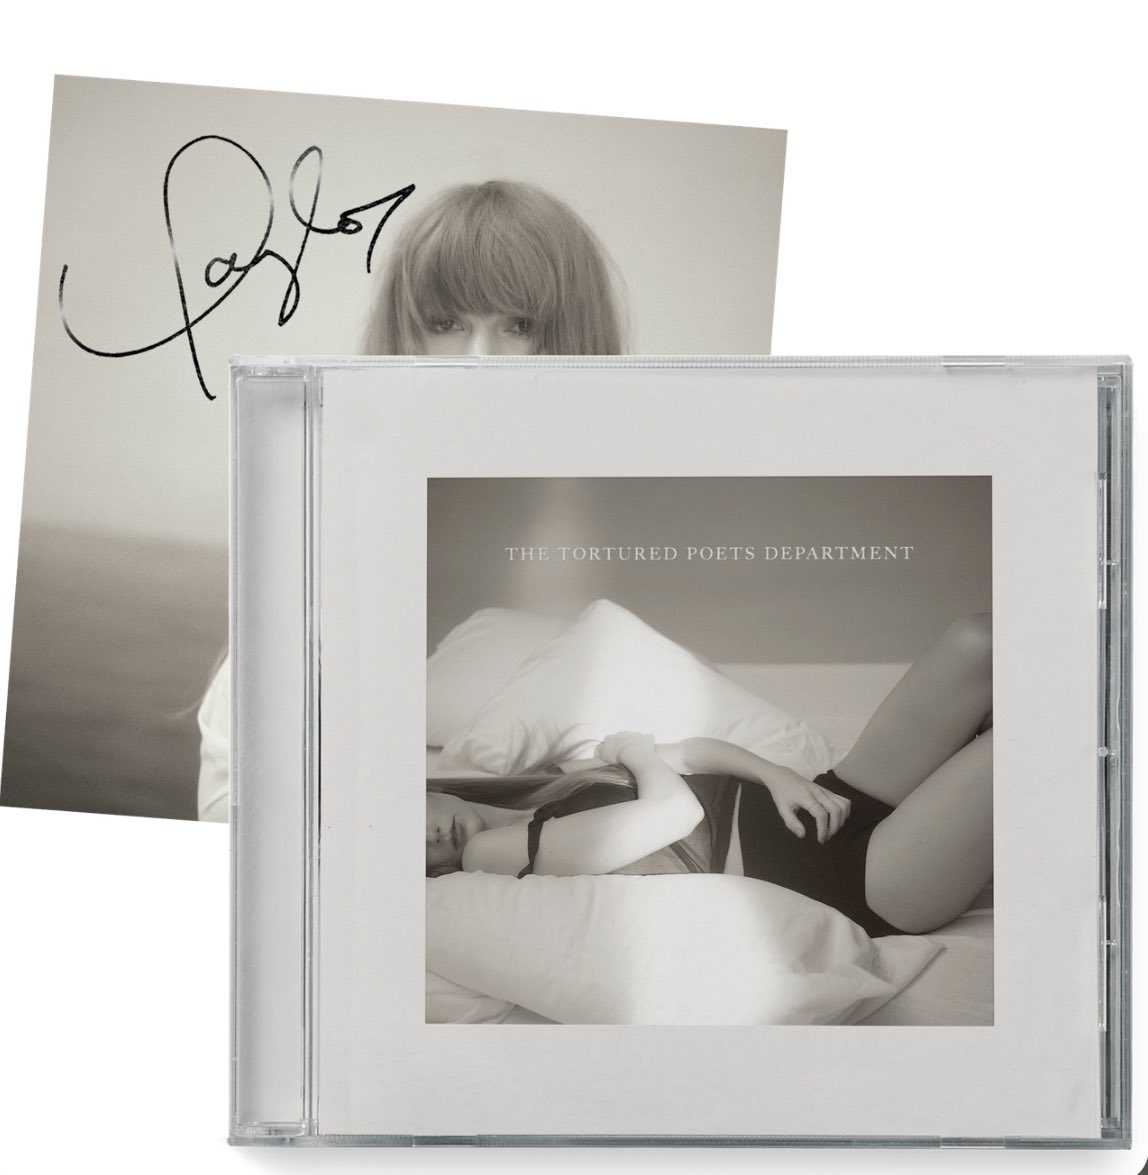 📯SIGNED CD #TSTTPD GIVEAWAY 📯 WORLD WIDE 🌎 🤍 TO ENTER 🤍 ✨ Follow my account ✨ Retweet and like this post ✨ Claiming TTPD track ✨ Extra entry follow IG “ayraswiftie” Giveaway ends May 31st 🕊️ May Tayvodoo be with you 🫶🏻 #TaylorSwift #Swiftie